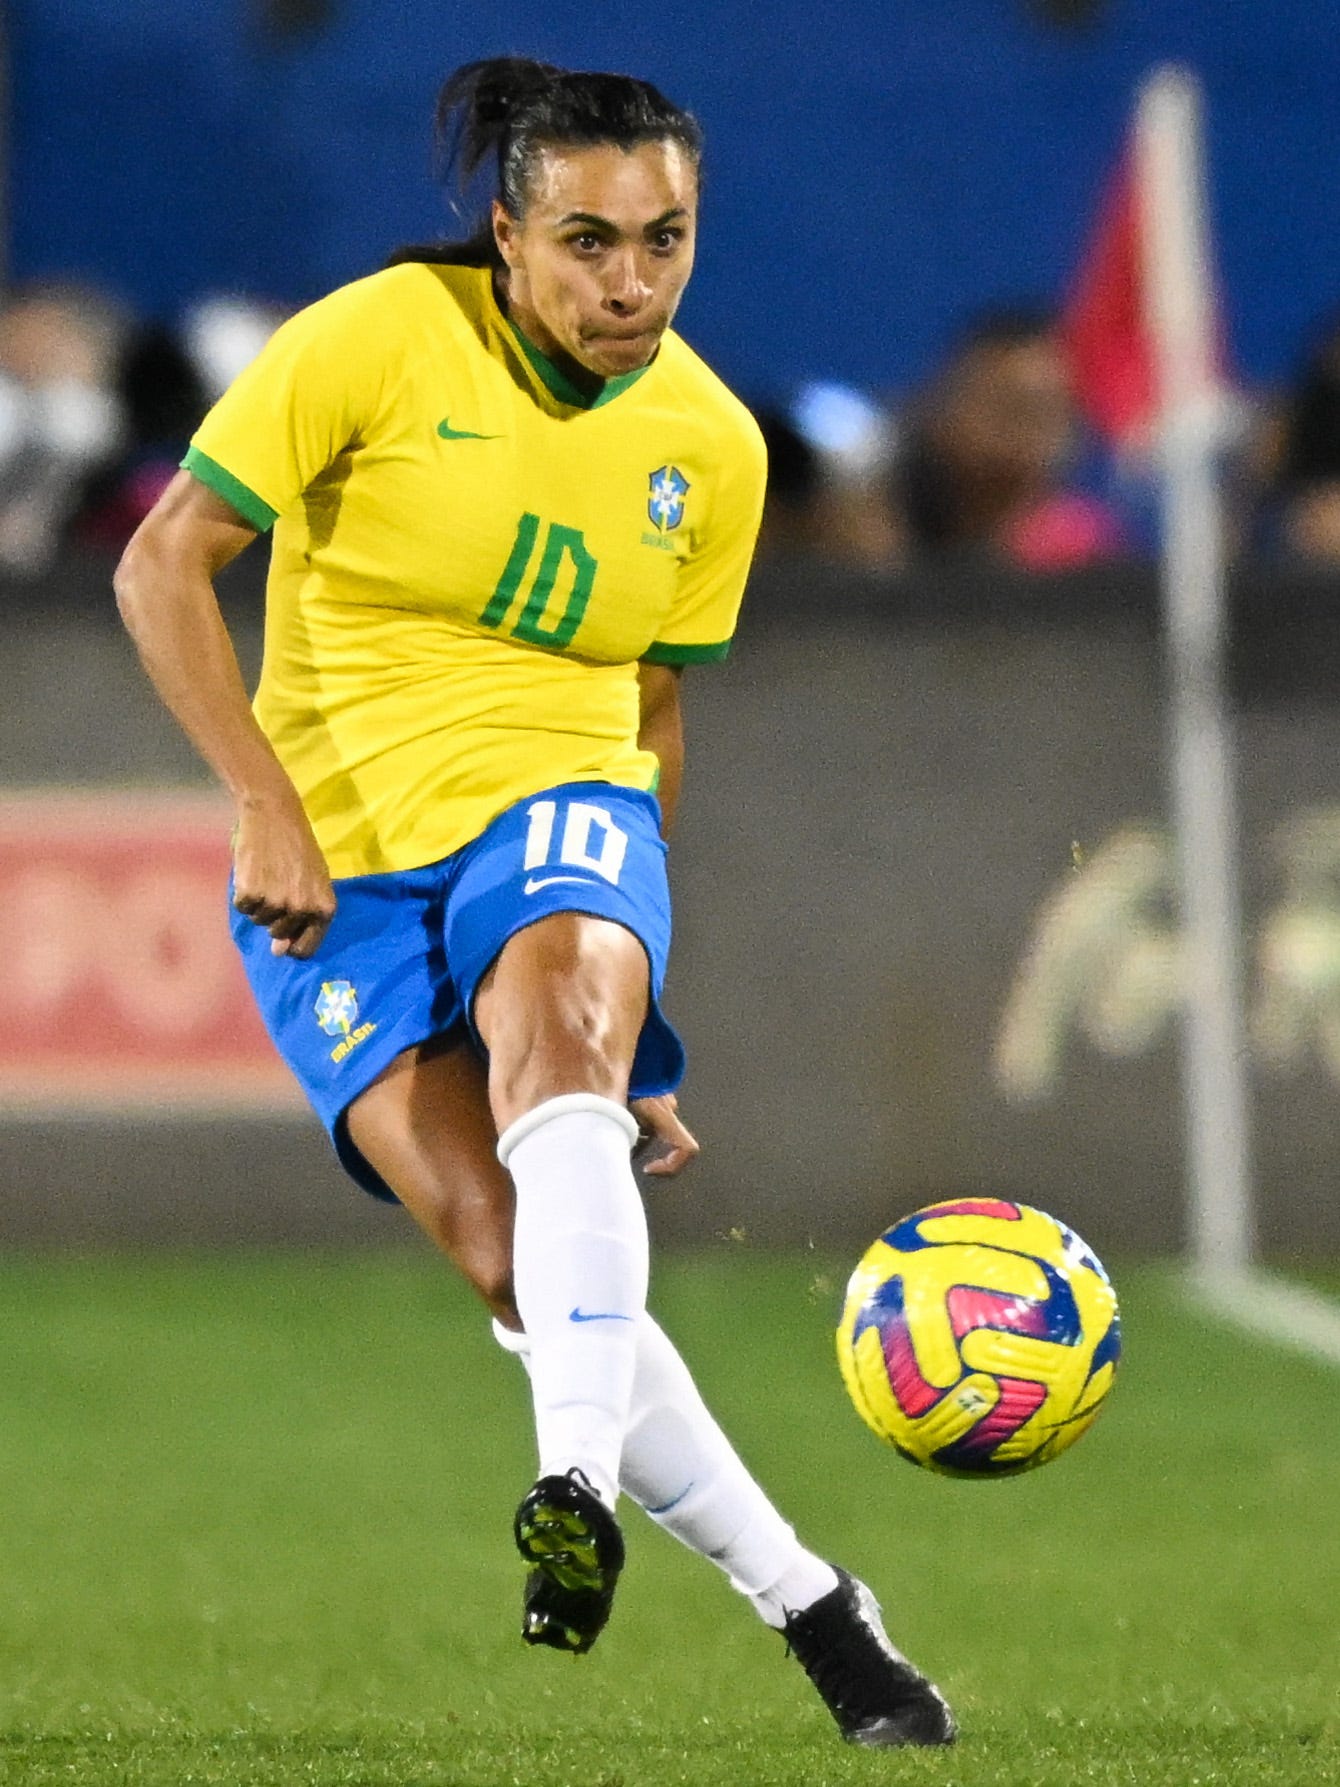 An action image of Marta playing soccer.